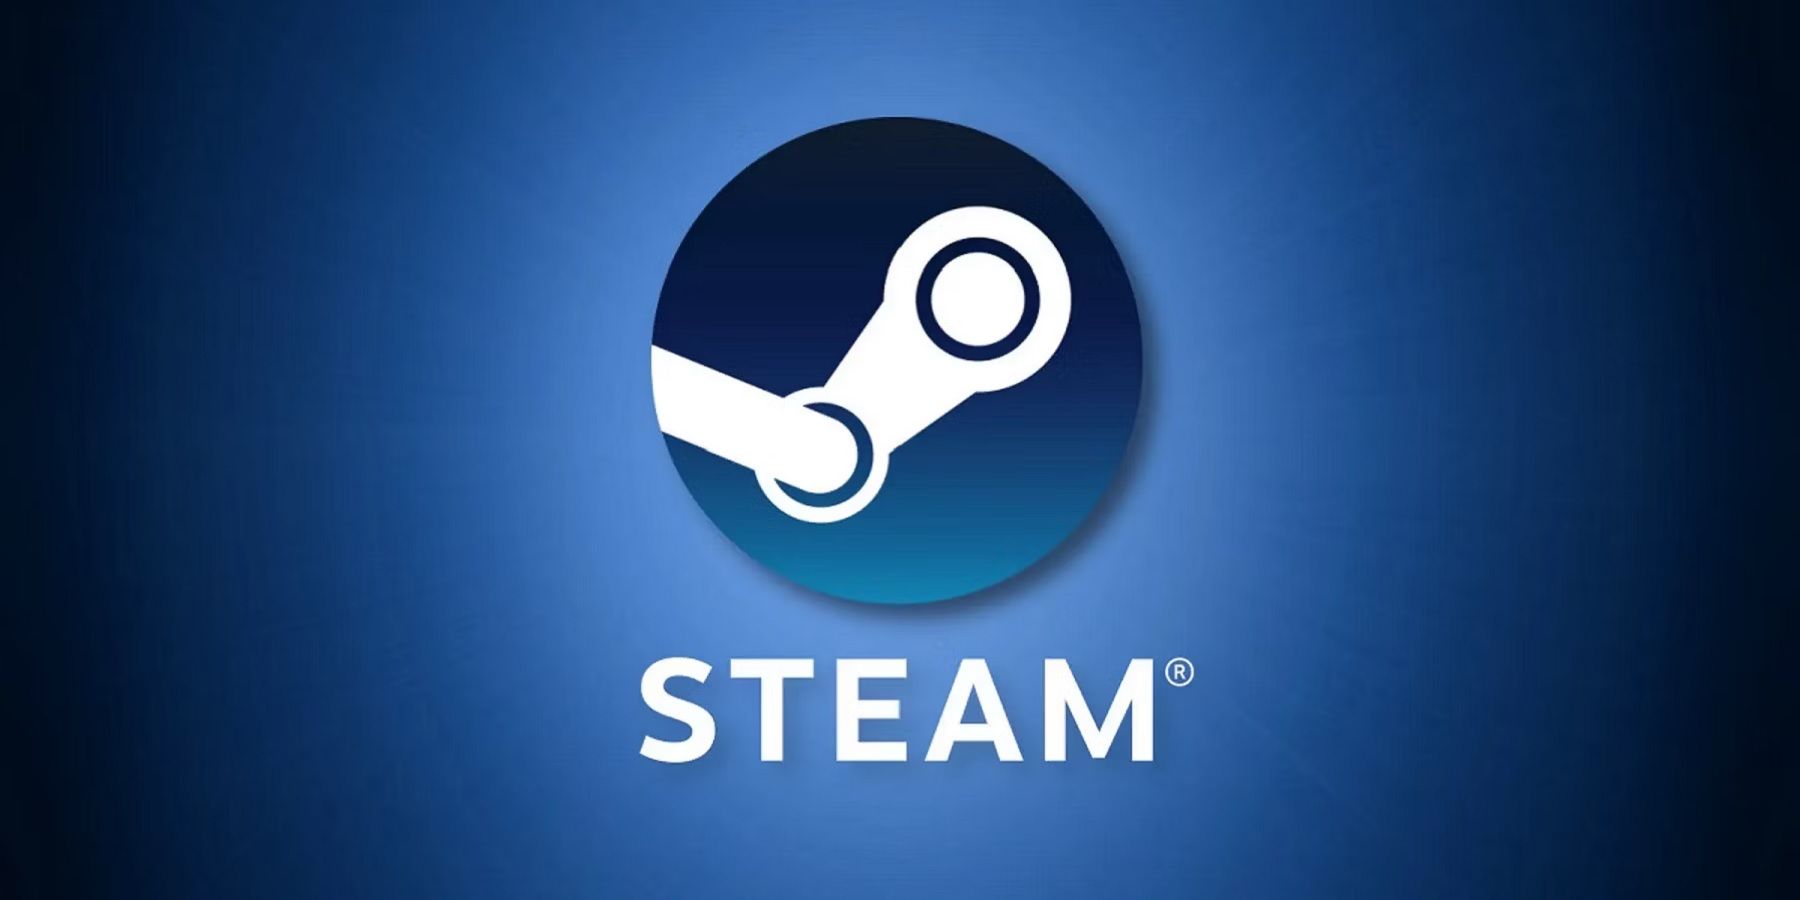 steam logo with blue background